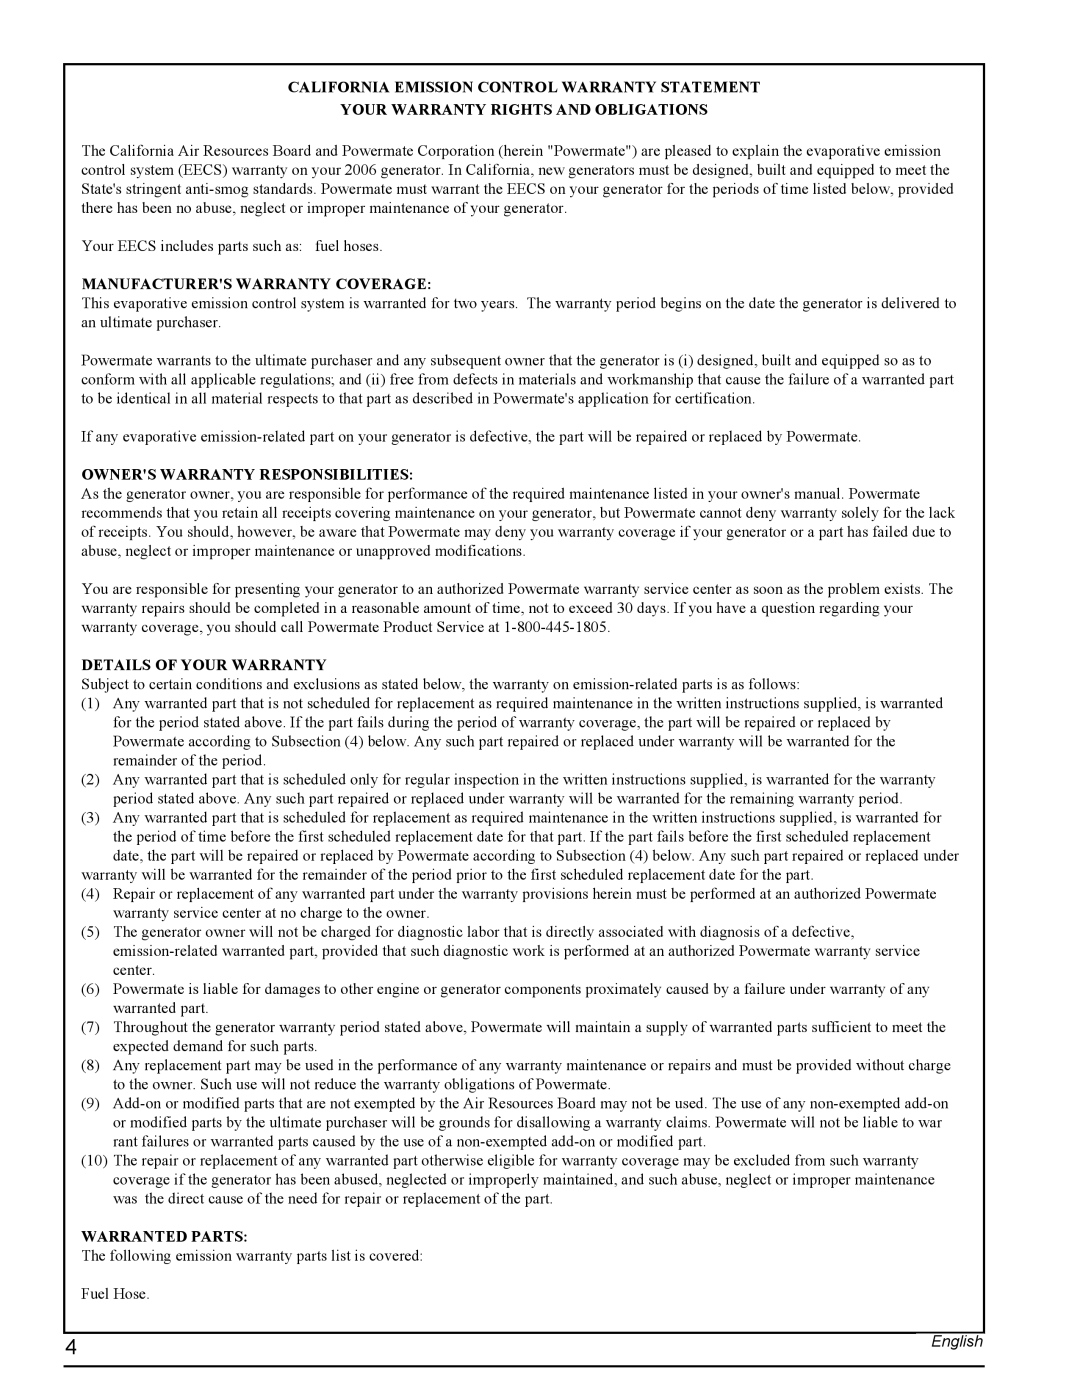 Powermate PMC435251 California Emission Control Warranty Statement, Your Warranty Rights And Obligations, Warranted Parts 